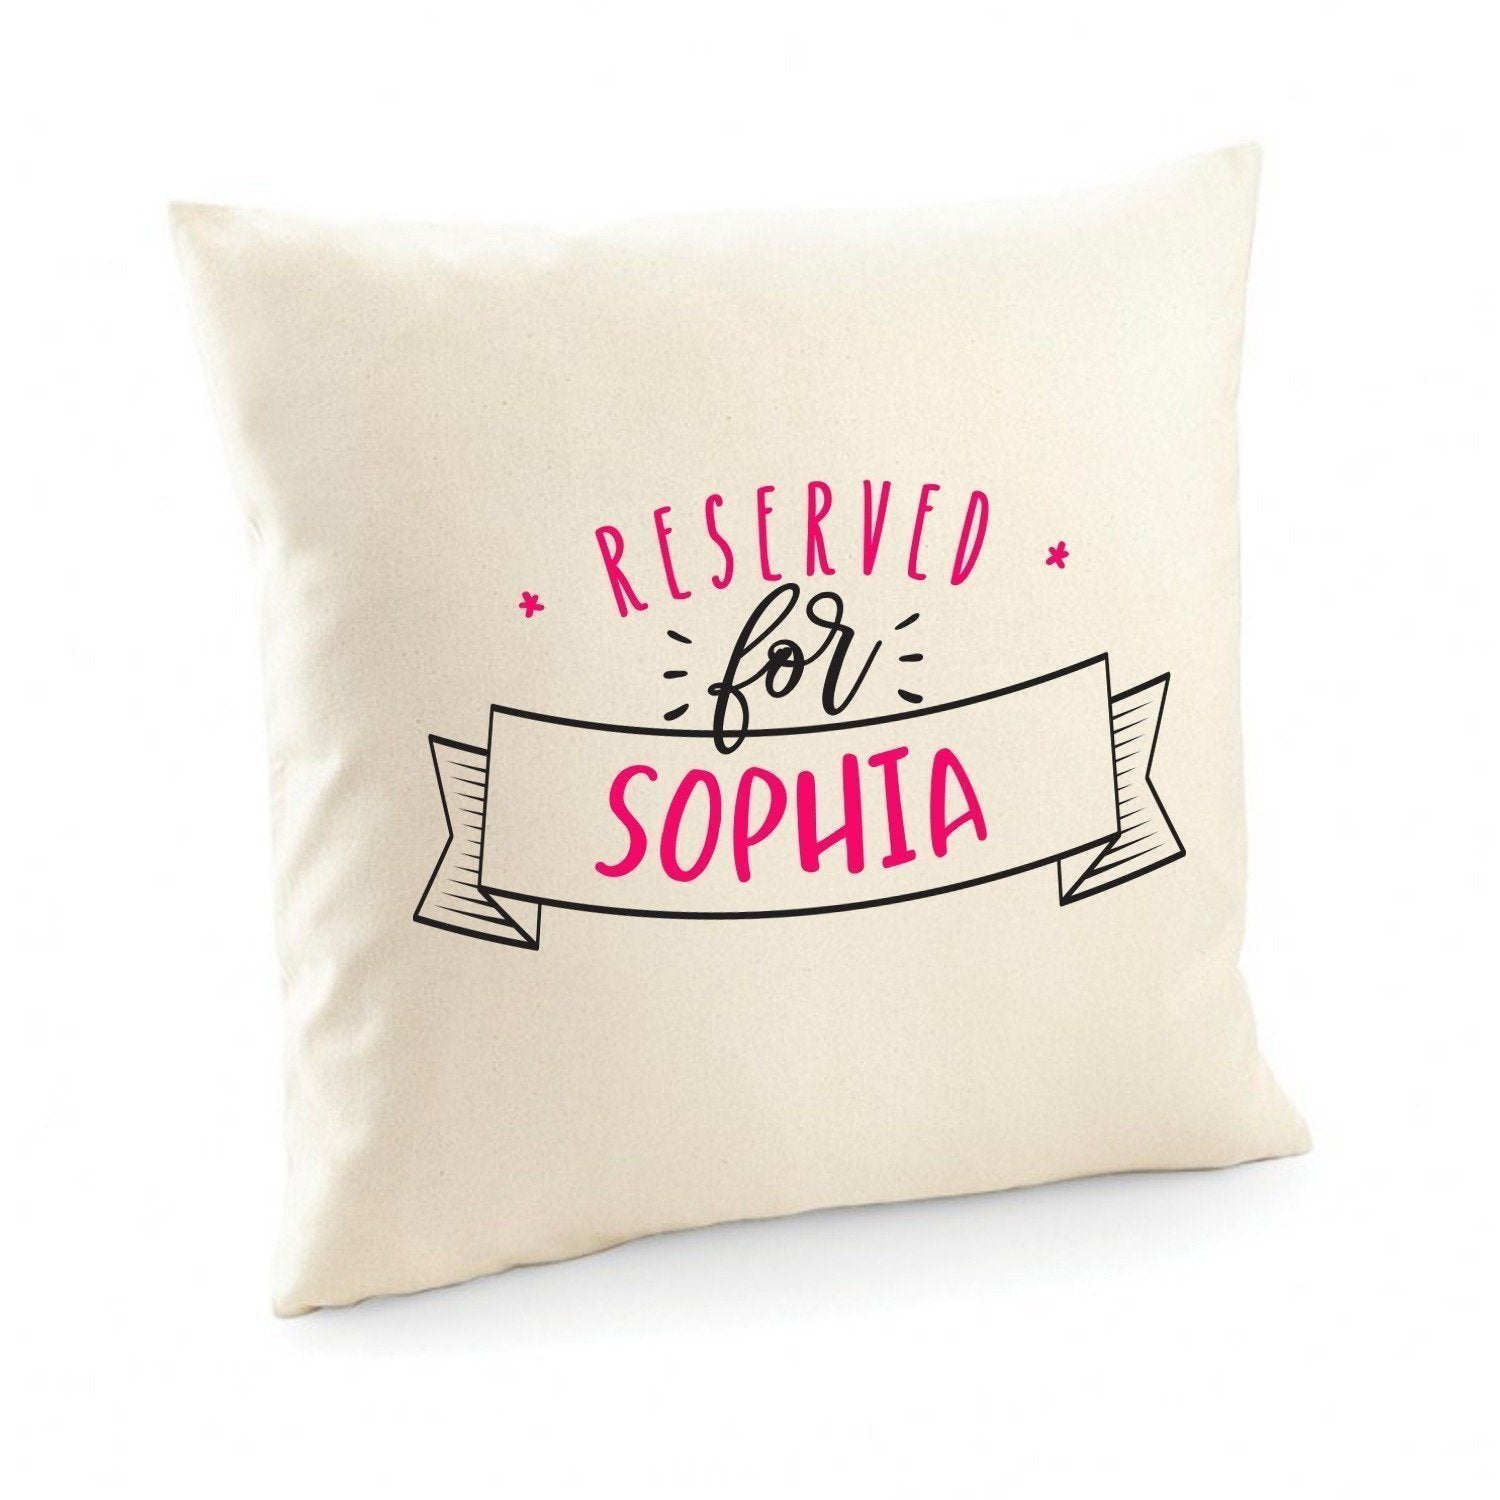 Personalised cushion cover, Reserved for a name, Gift for her and him, Custom housewarming gift